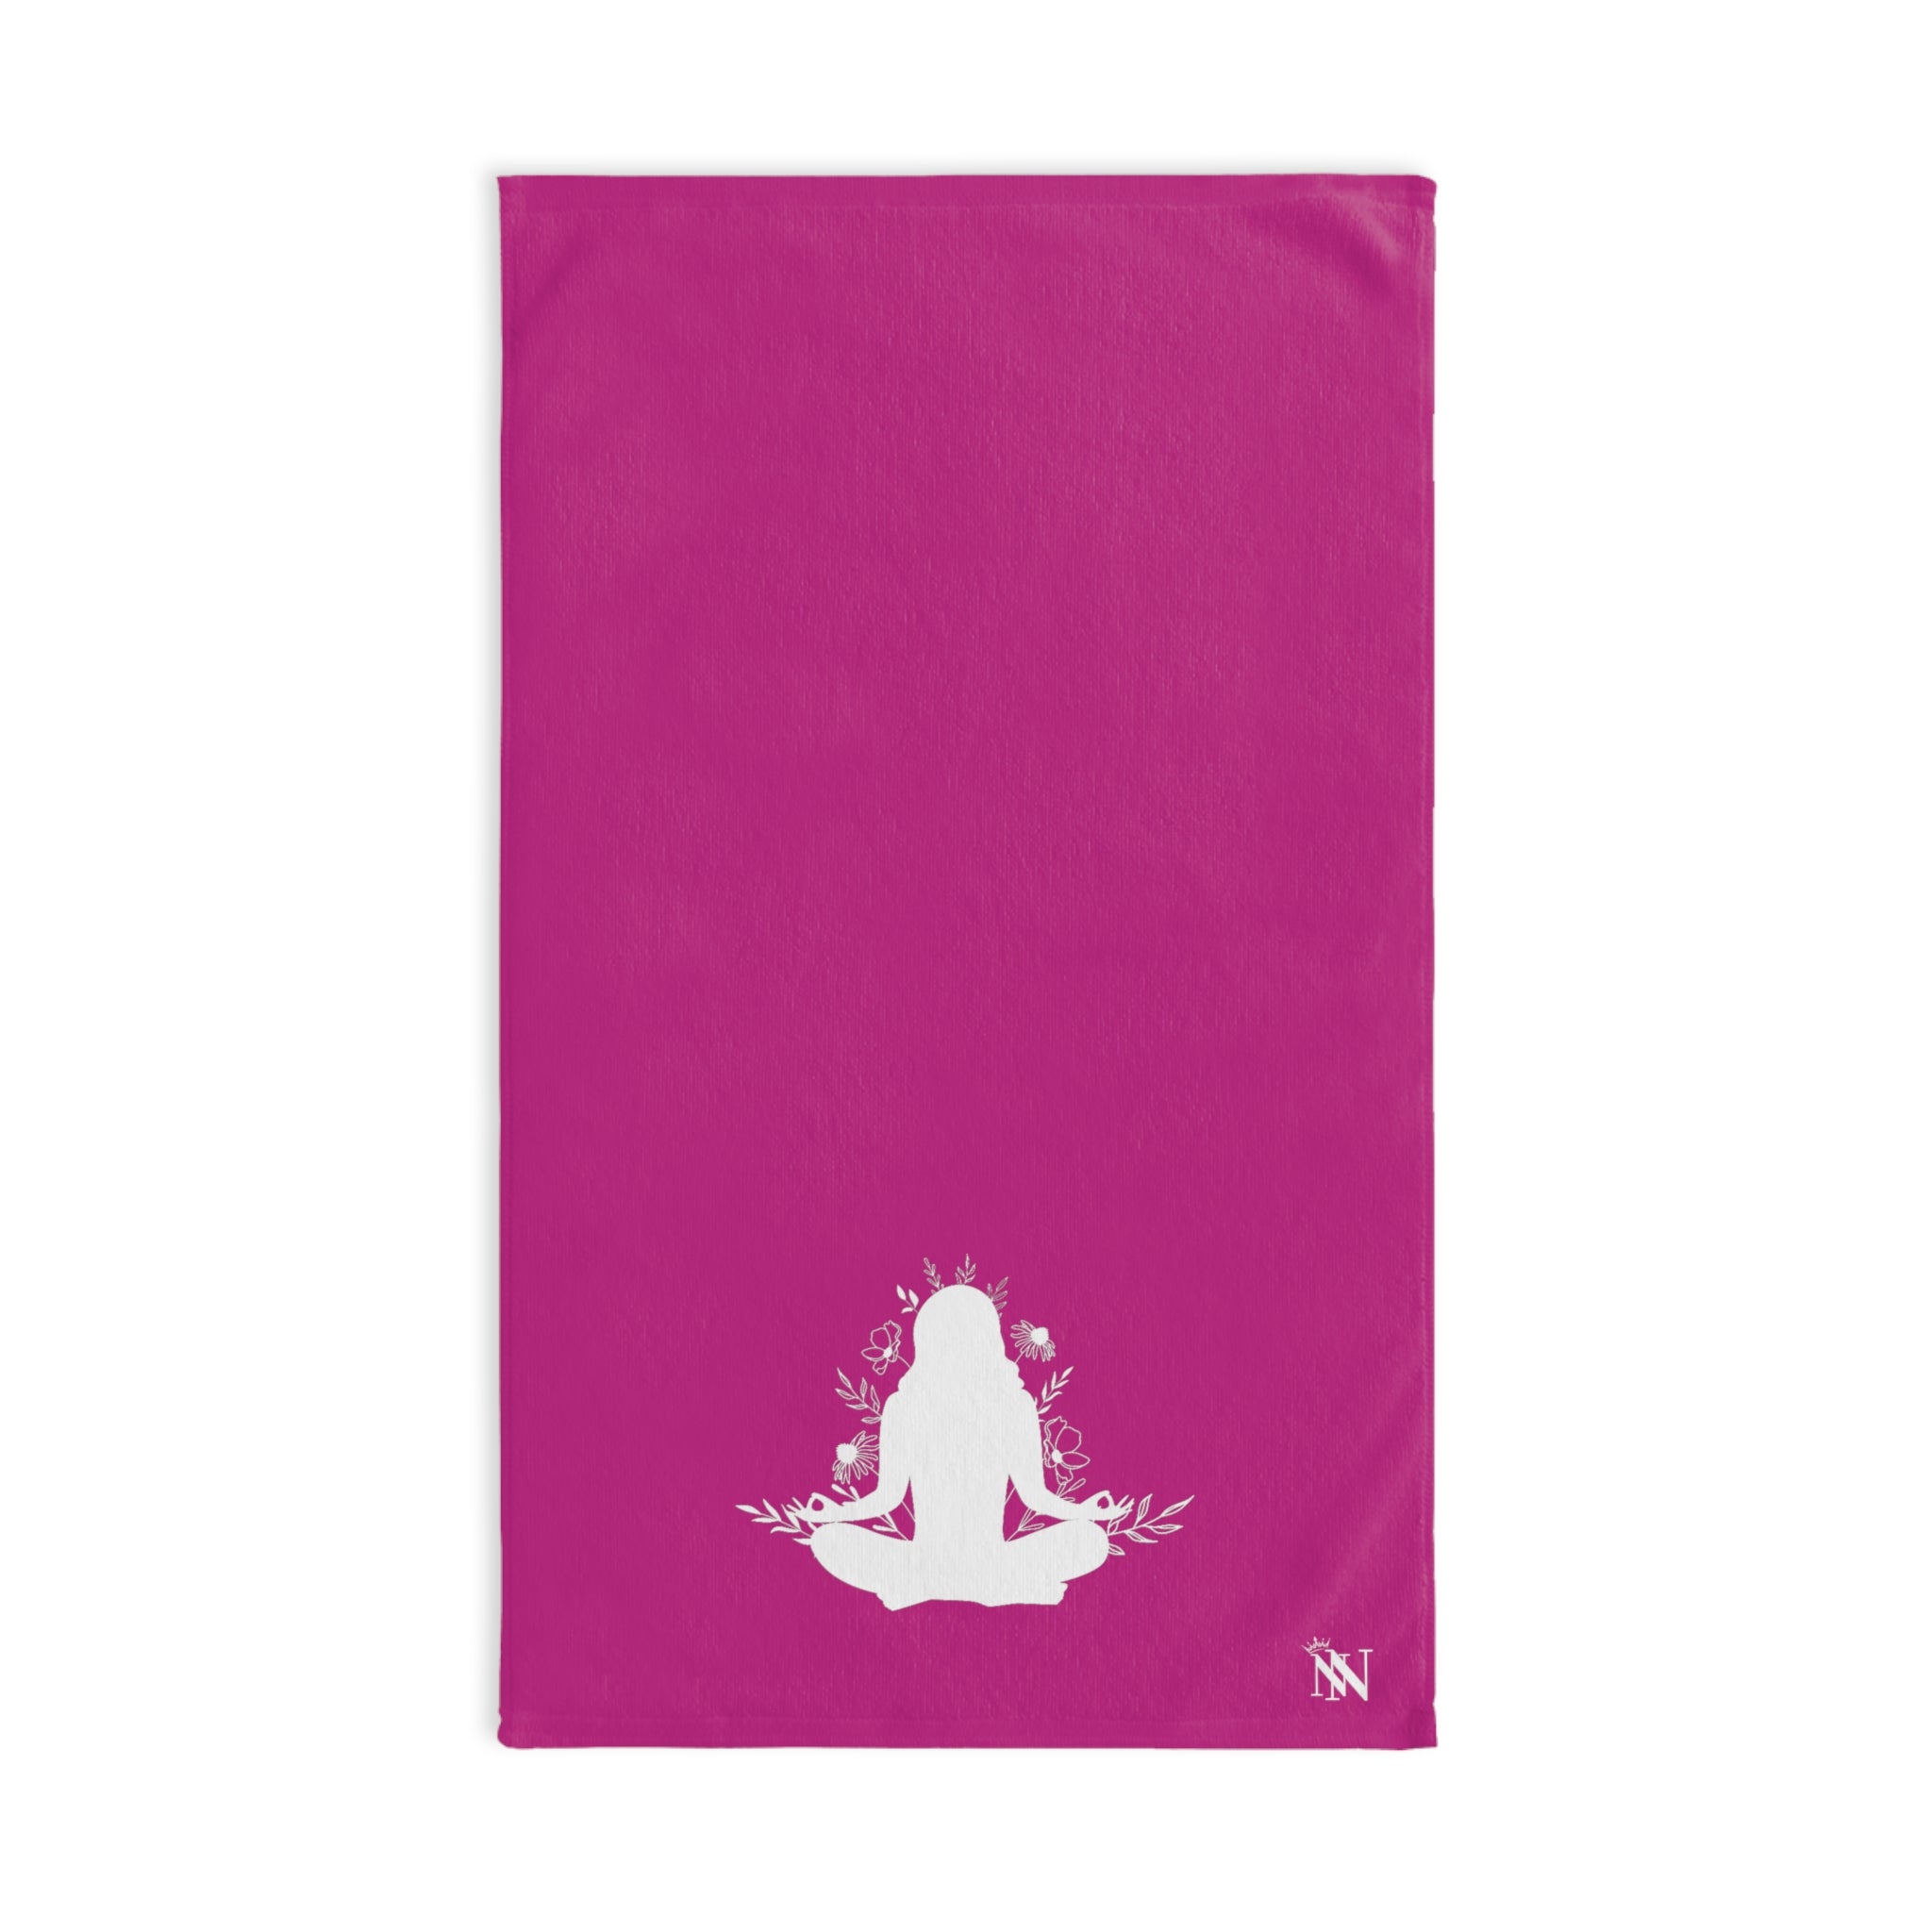 Yoga Seated Med  Fuscia | Funny Gifts for Men - Gifts for Him - Birthday Gifts for Men, Him, Husband, Boyfriend, New Couple Gifts, Fathers & Valentines Day Gifts, Hand Towels NECTAR NAPKINS